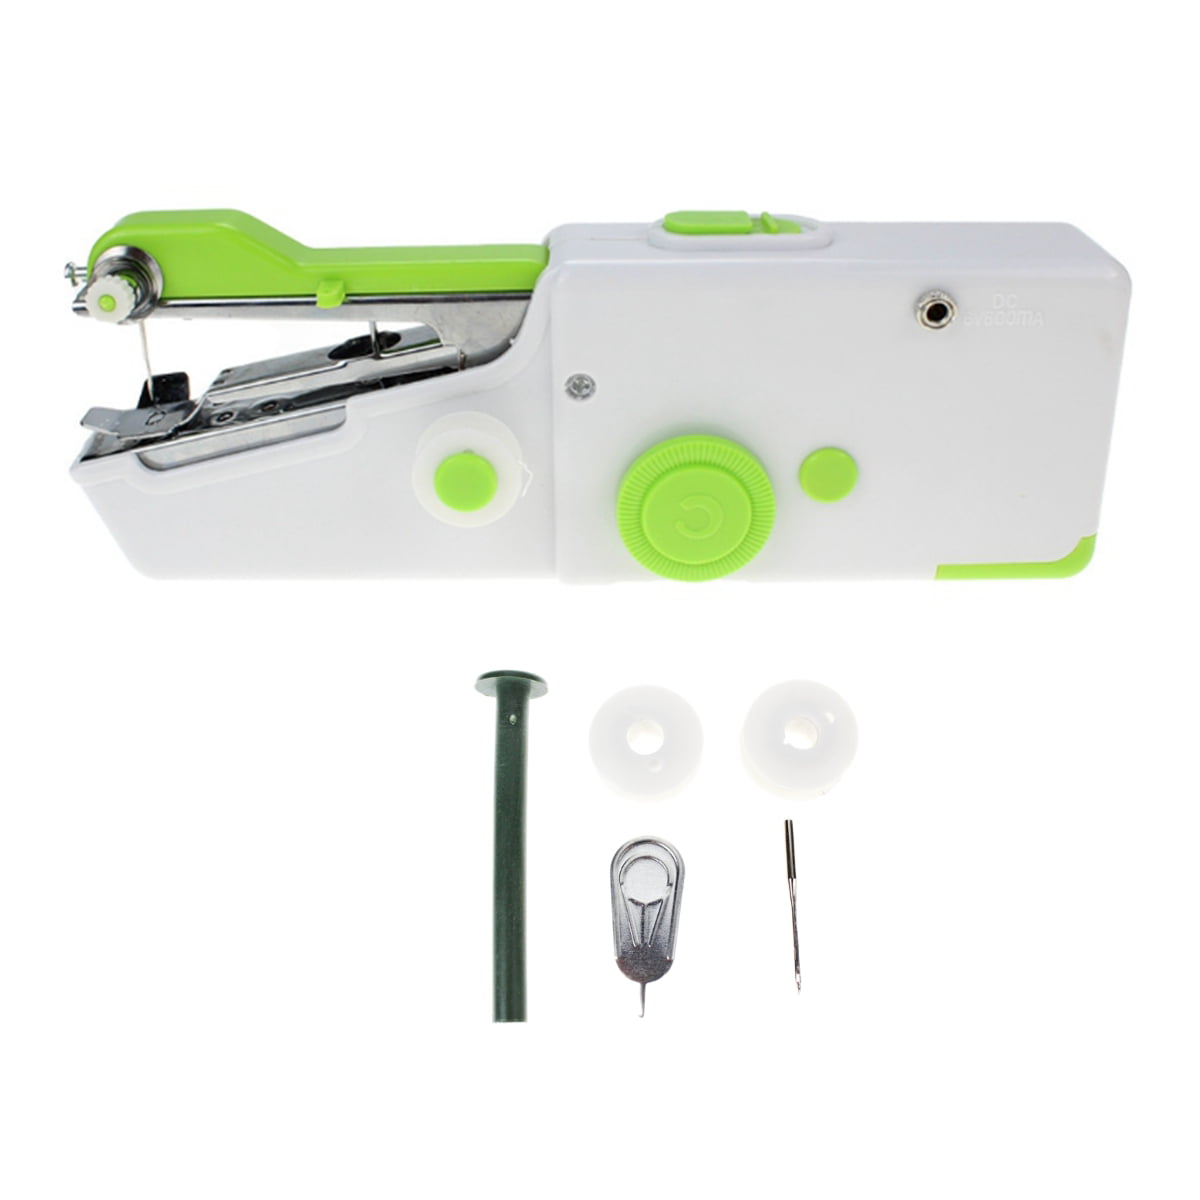 Portable Smart Electric Tailor Stitch Hand-held Sewing Machine Charger Kit Craft 